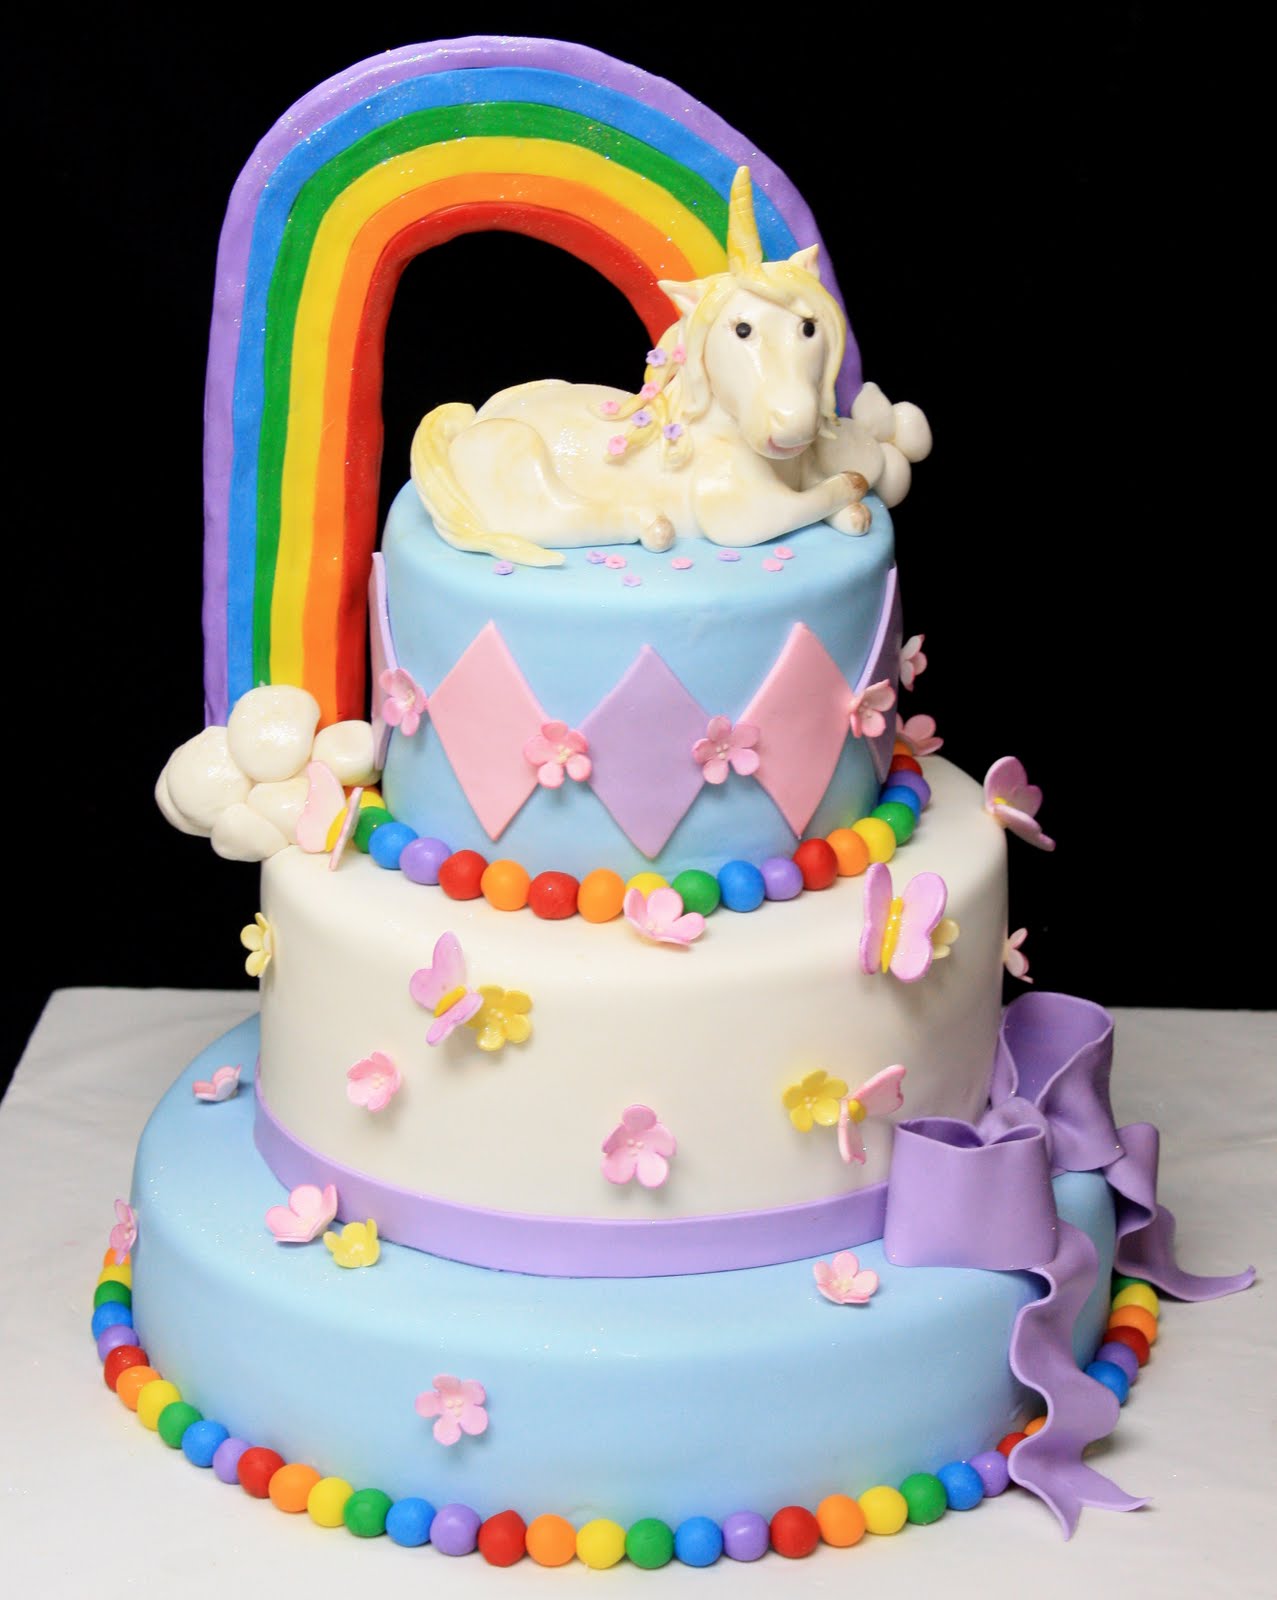 Sweets and life: Baking Inspiration: Unicorns and such